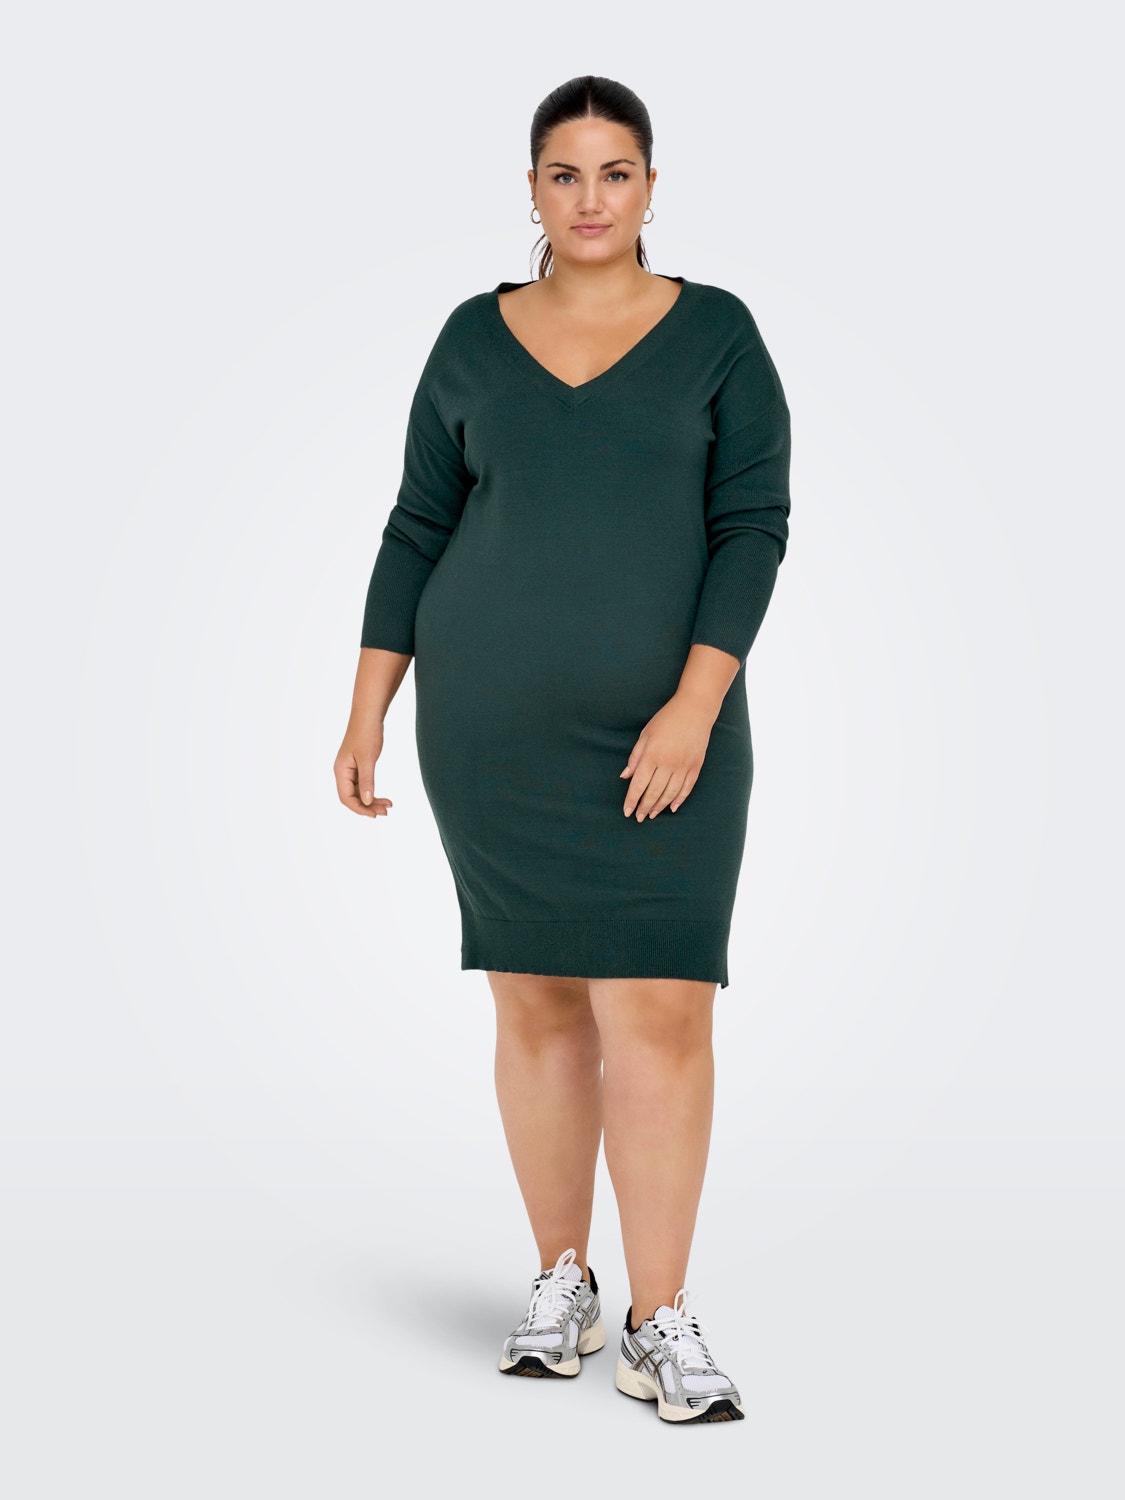 ONLY Curvy v-neck knitted dress -Green Gables - 15263791